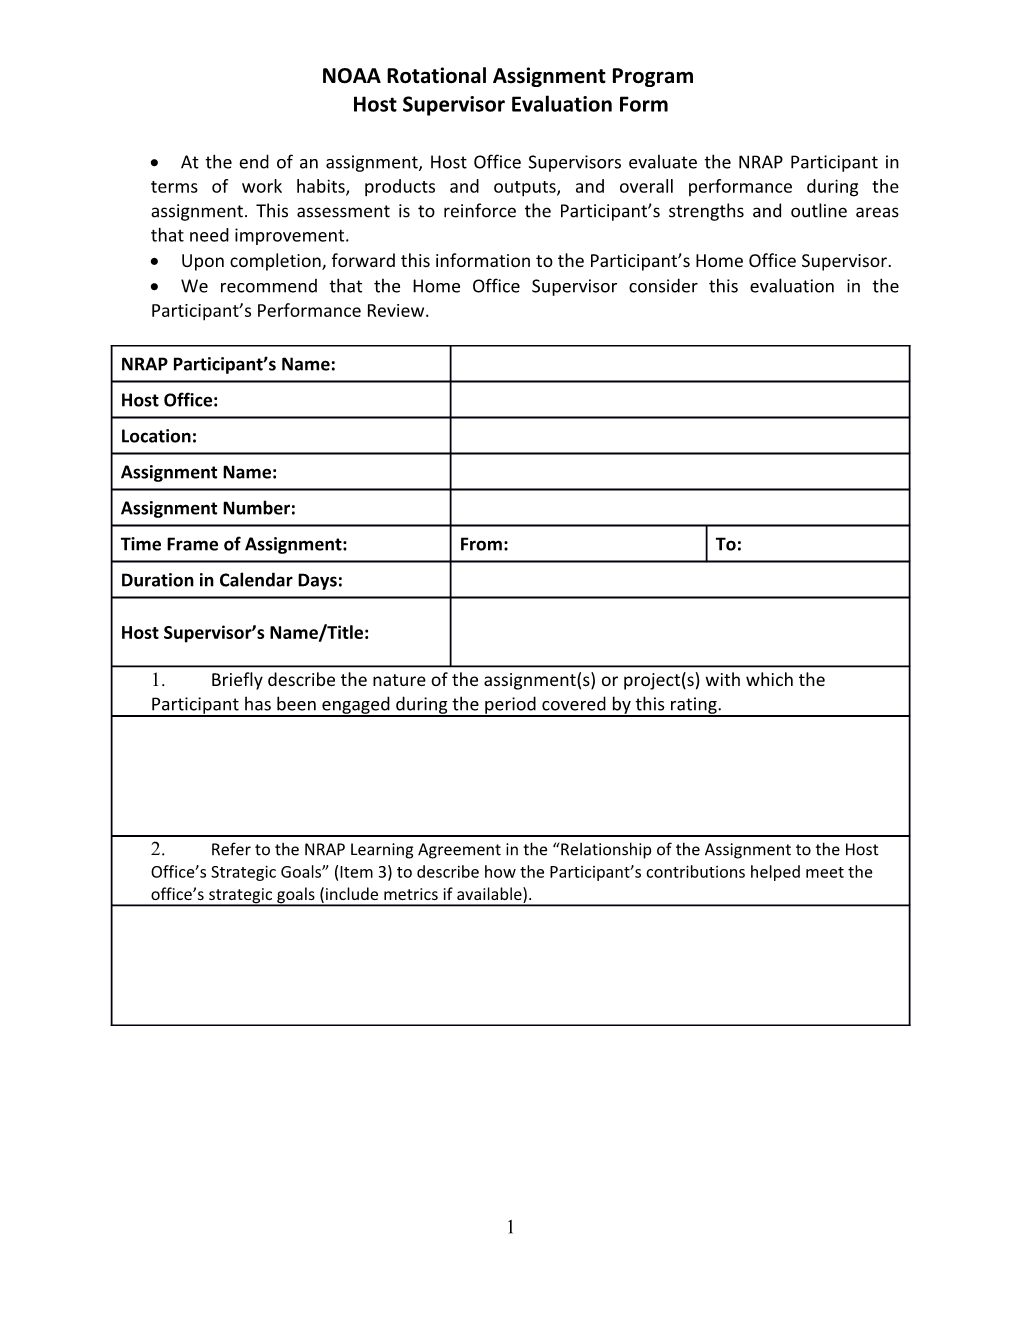 NRAP Host Evaluation Form of Participants, to Go to Participant's Home Office Supervisor